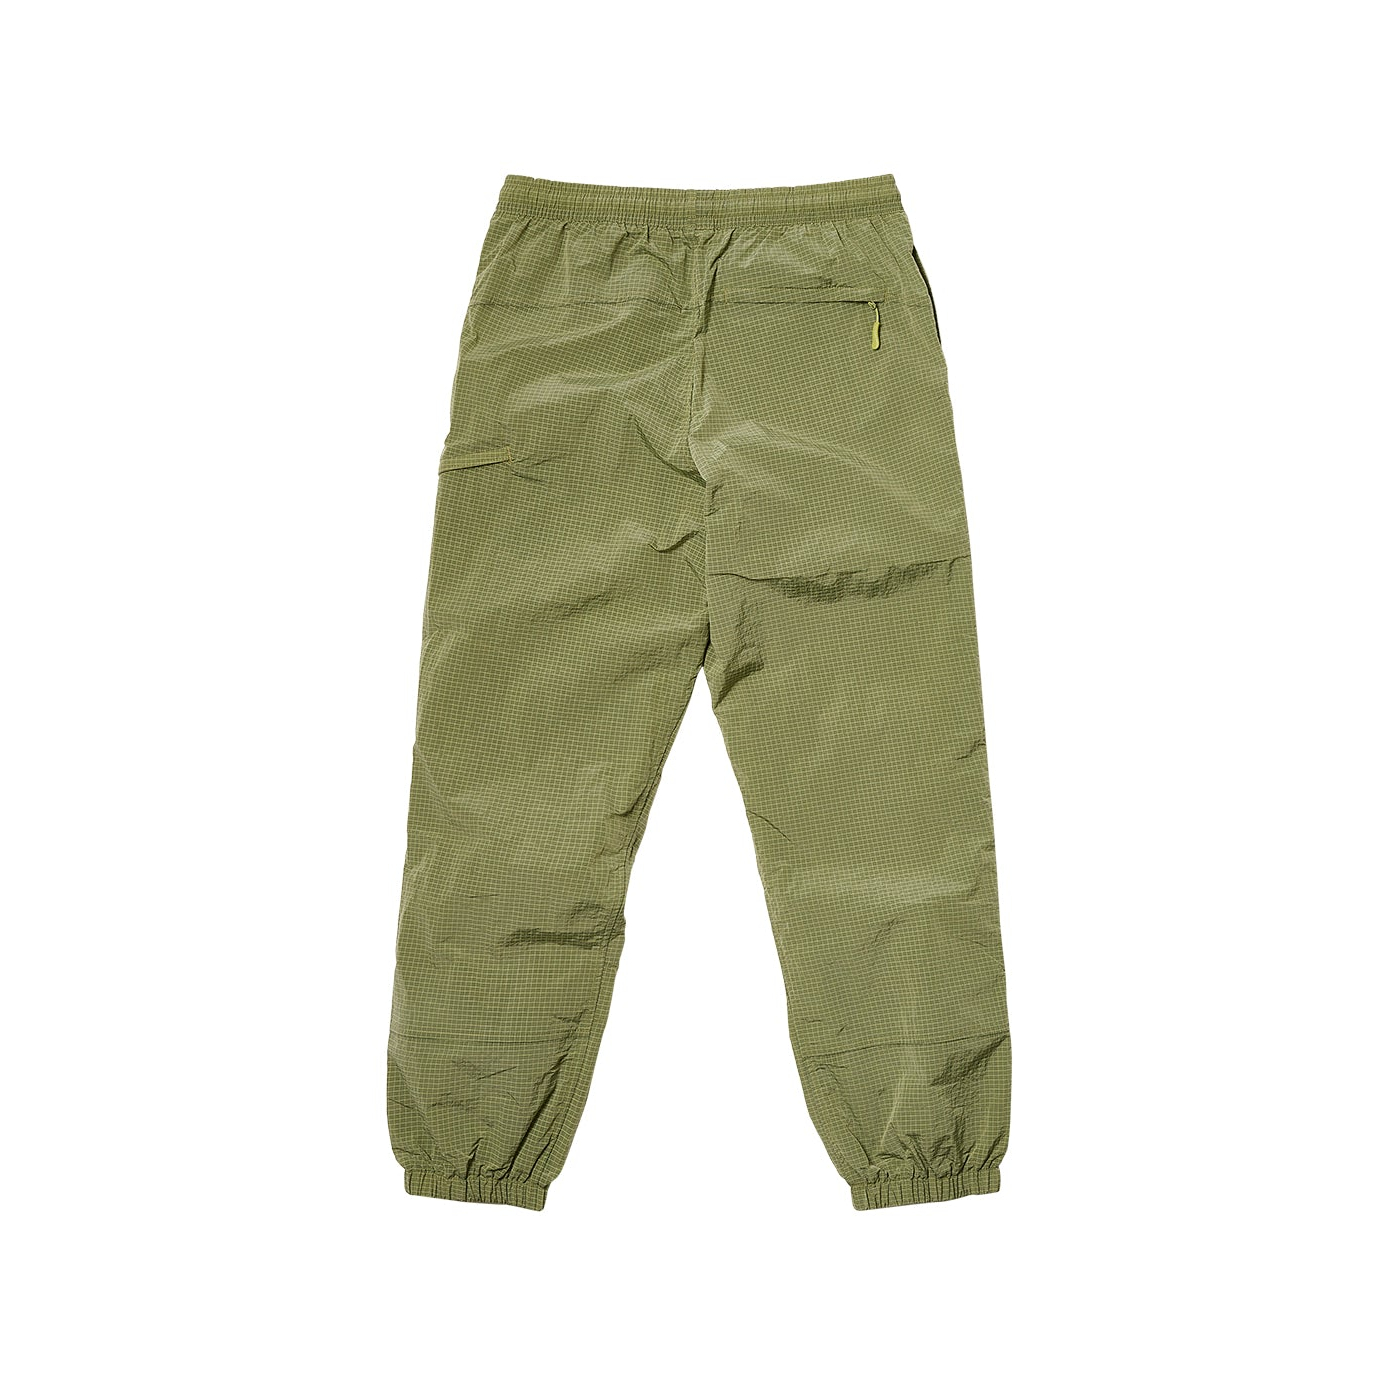 Thumbnail Y-RIPSTOP SHELL JOGGER LIME one color